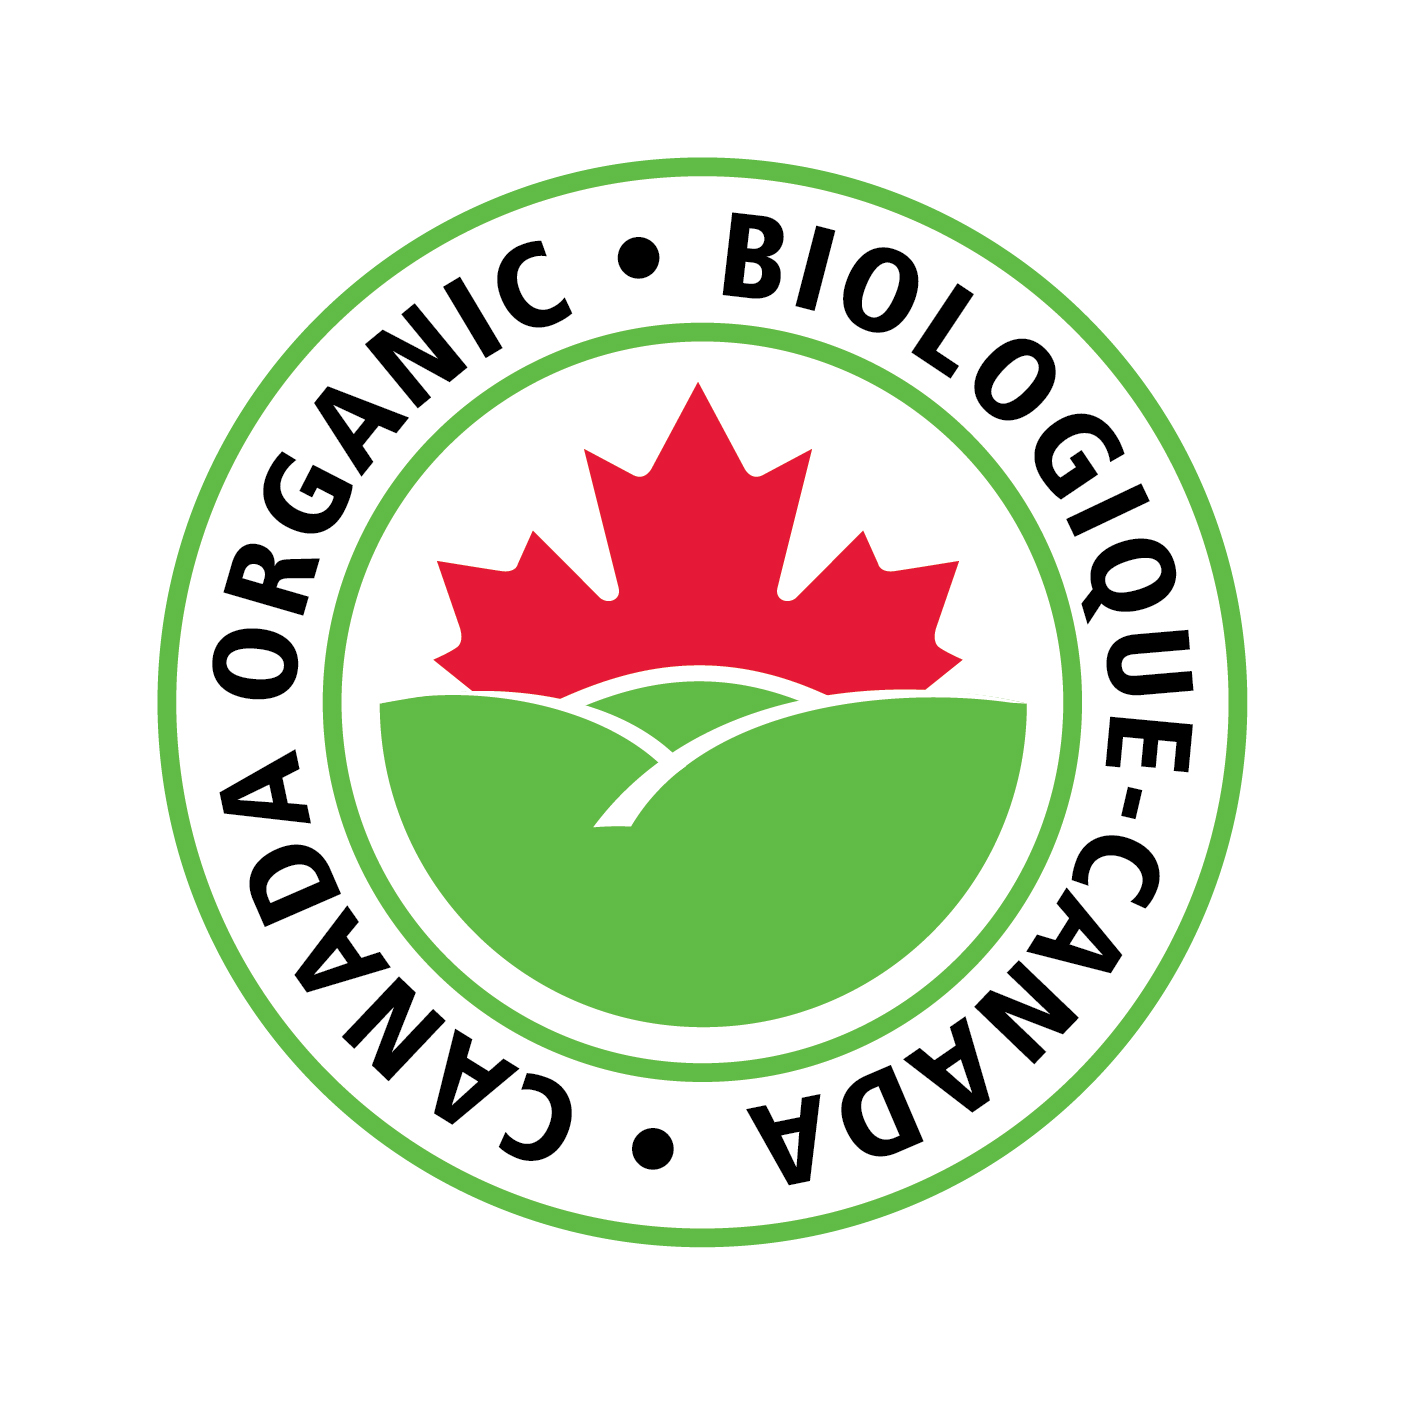 Introduction to organic farming in Ontario